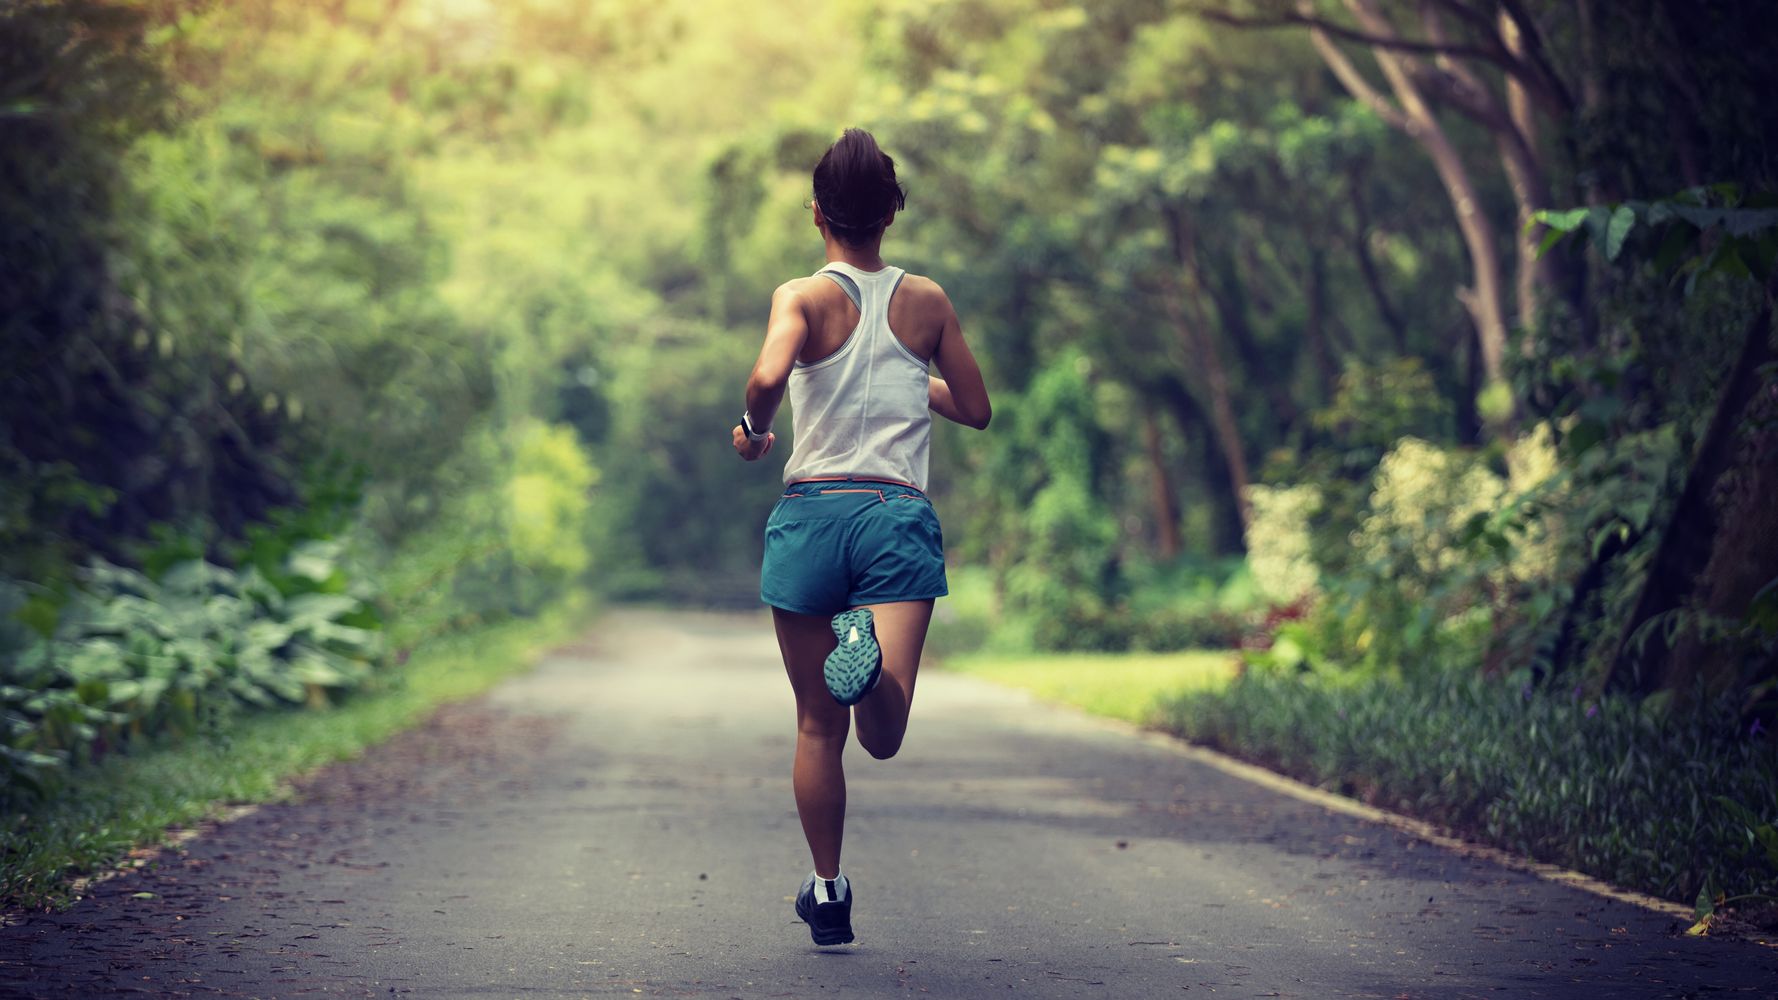 What We Know About Joggers' Breathing And Your Covid Risk | HuffPost UK